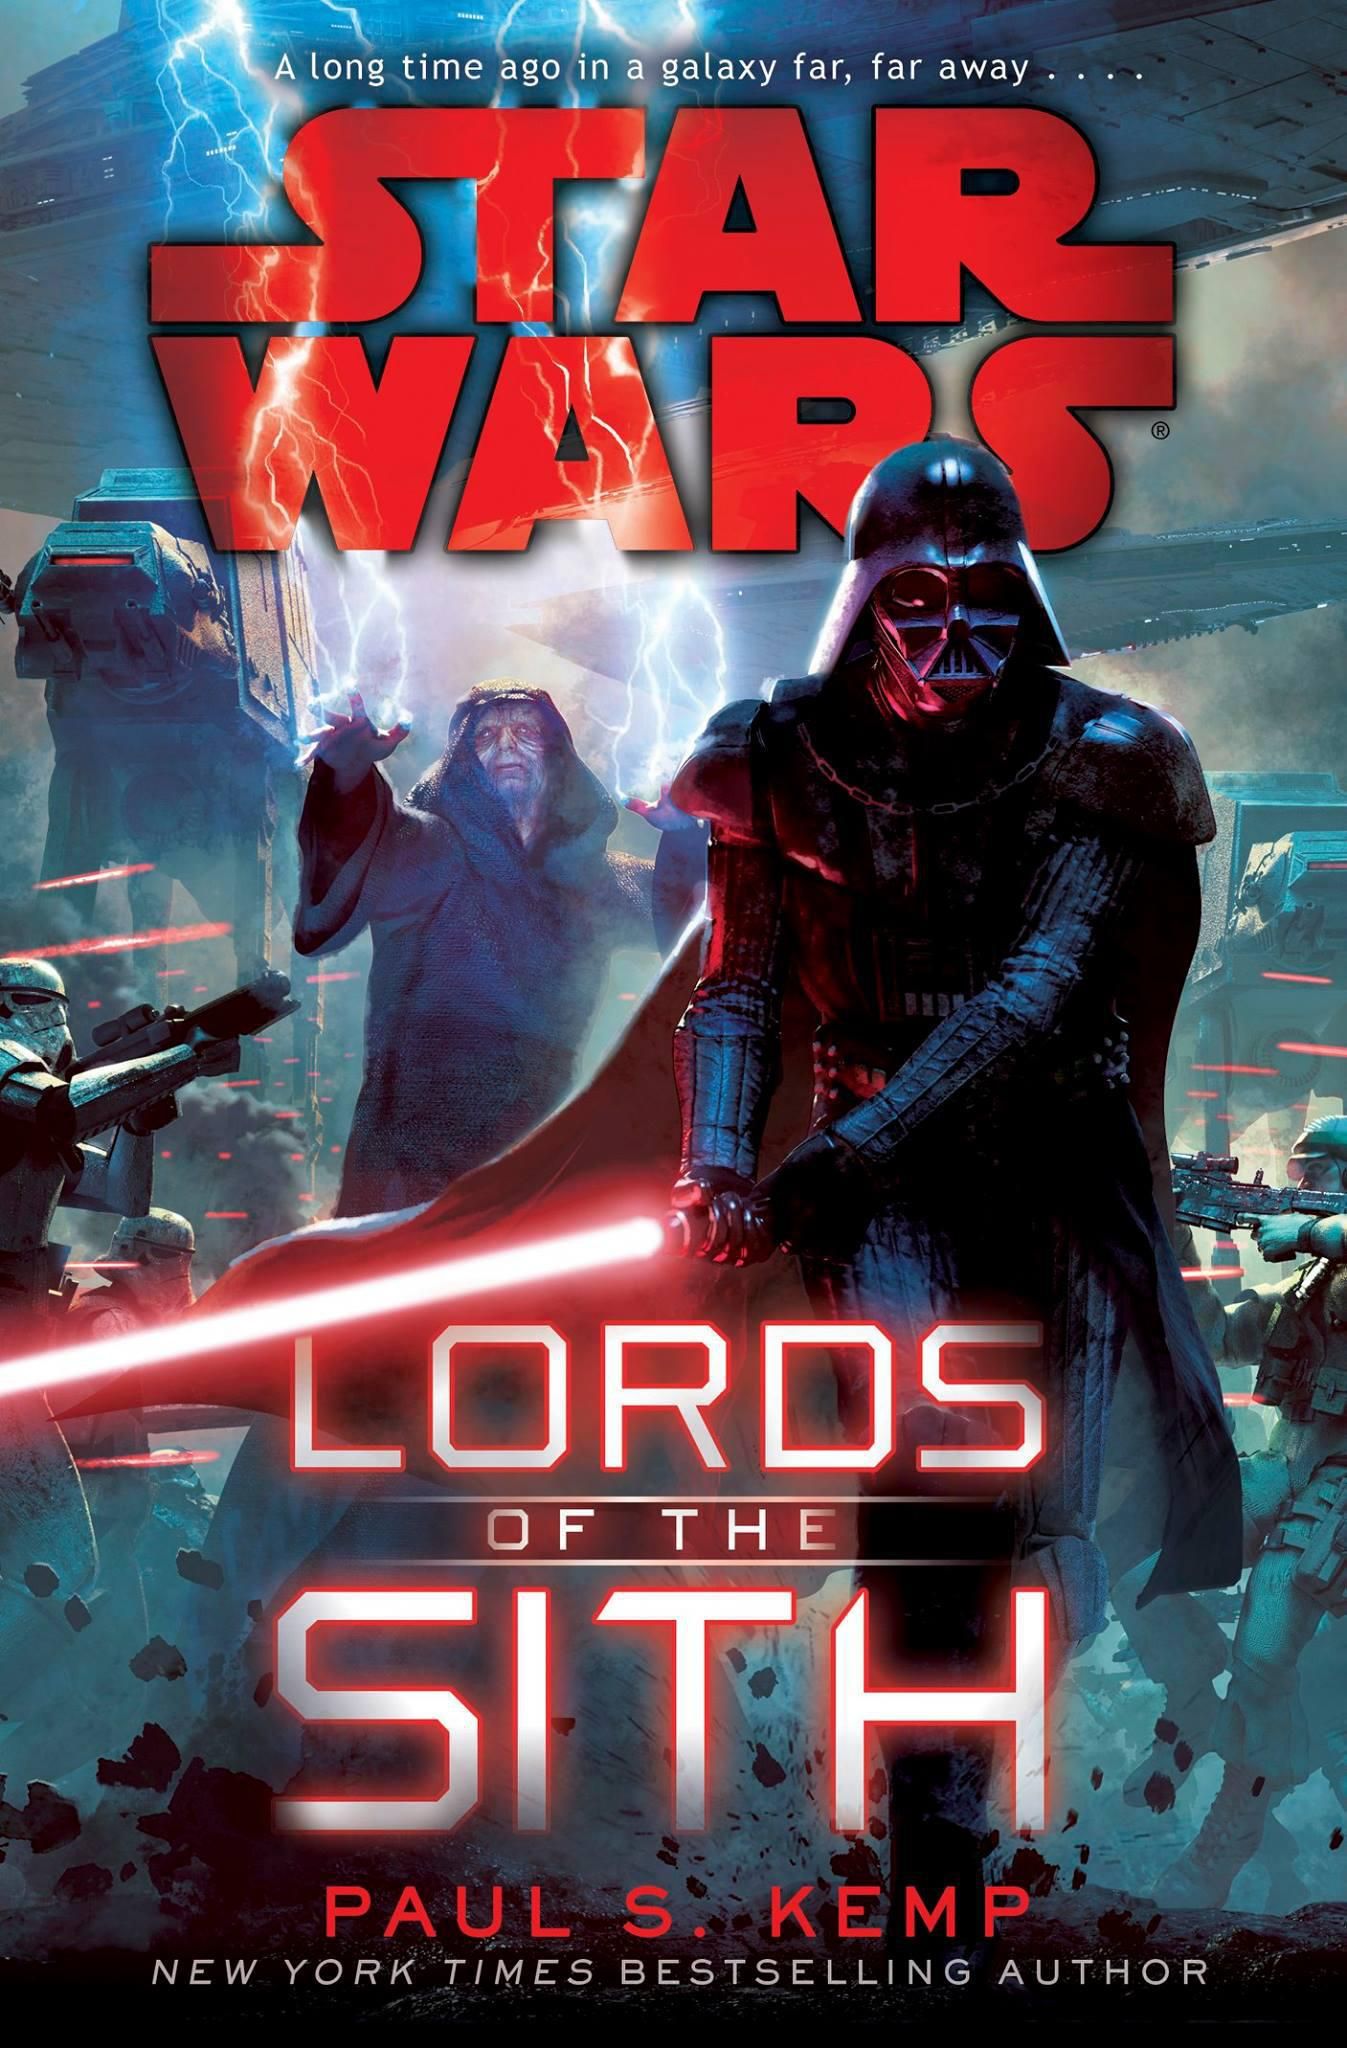 Star Wars Lords of the Sith Novel Cover